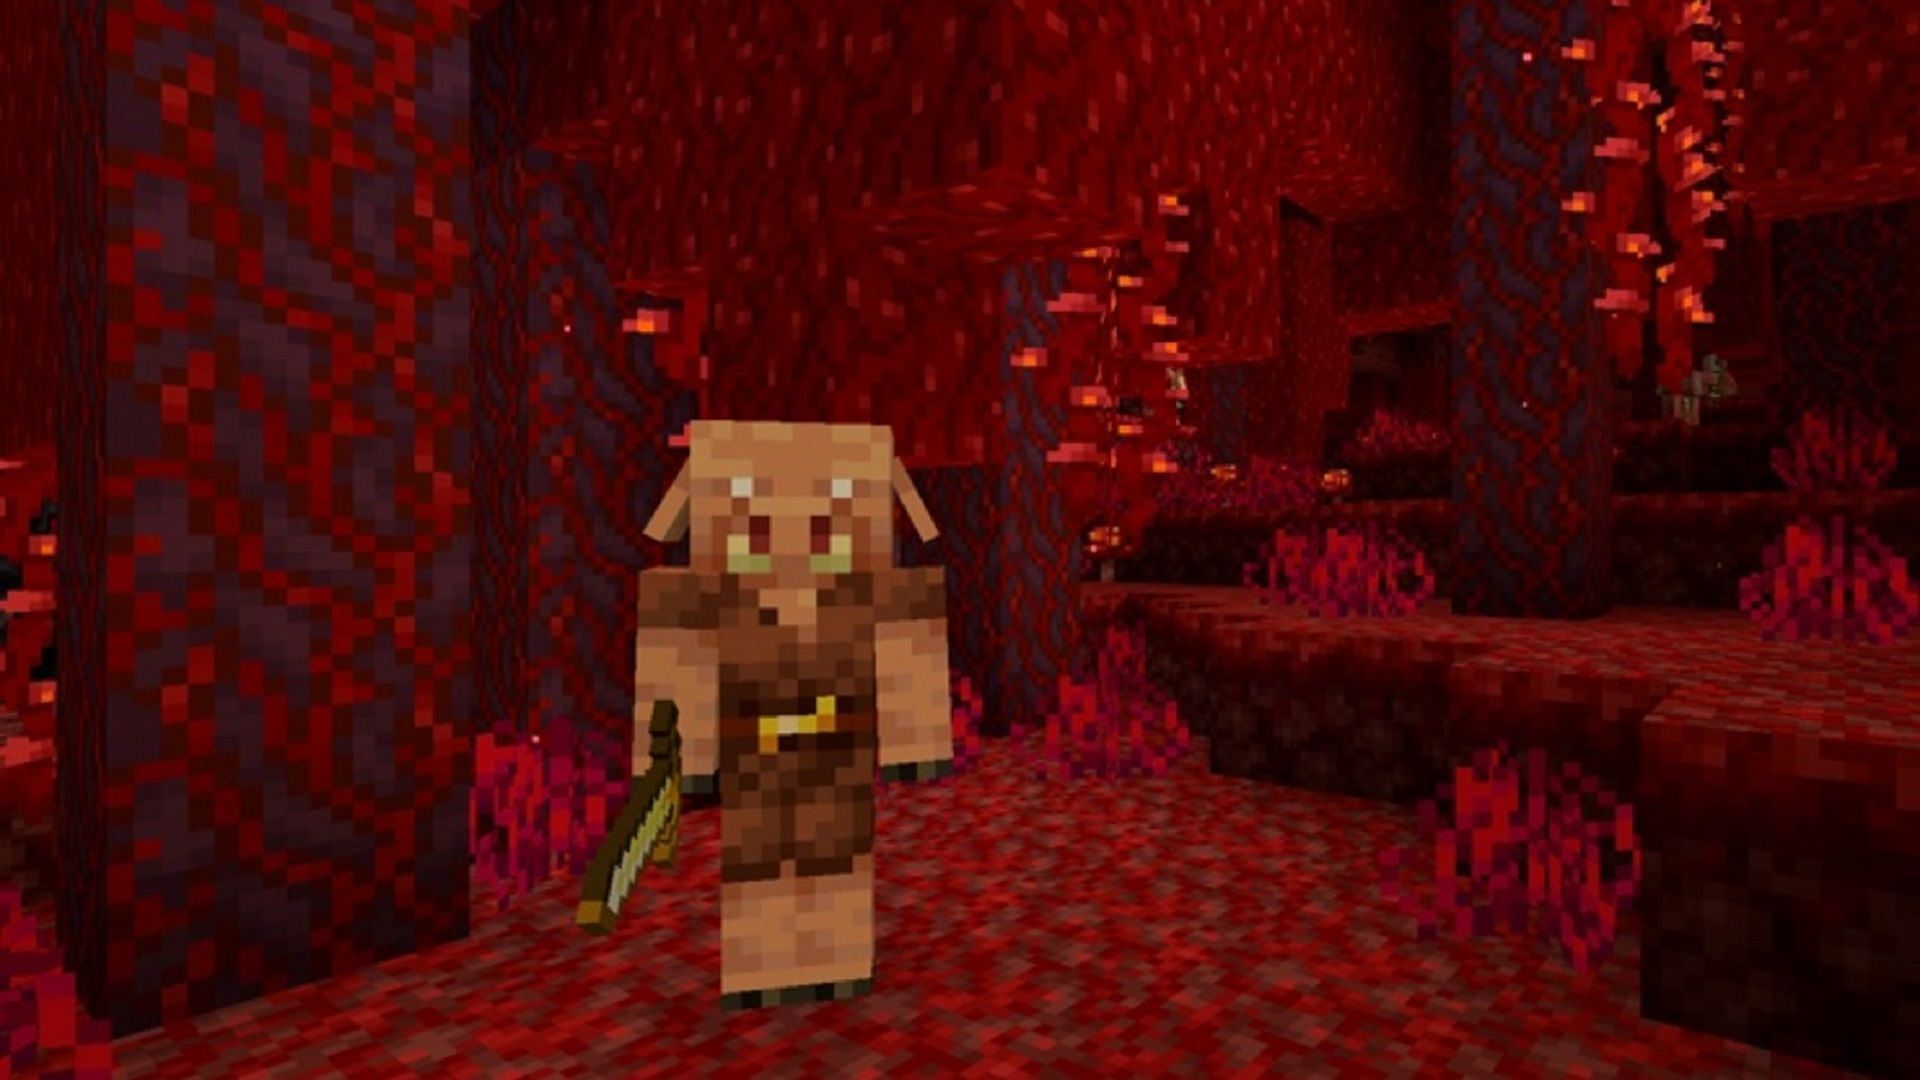 Piglins can occasionally be hostile in Minecraft, but they